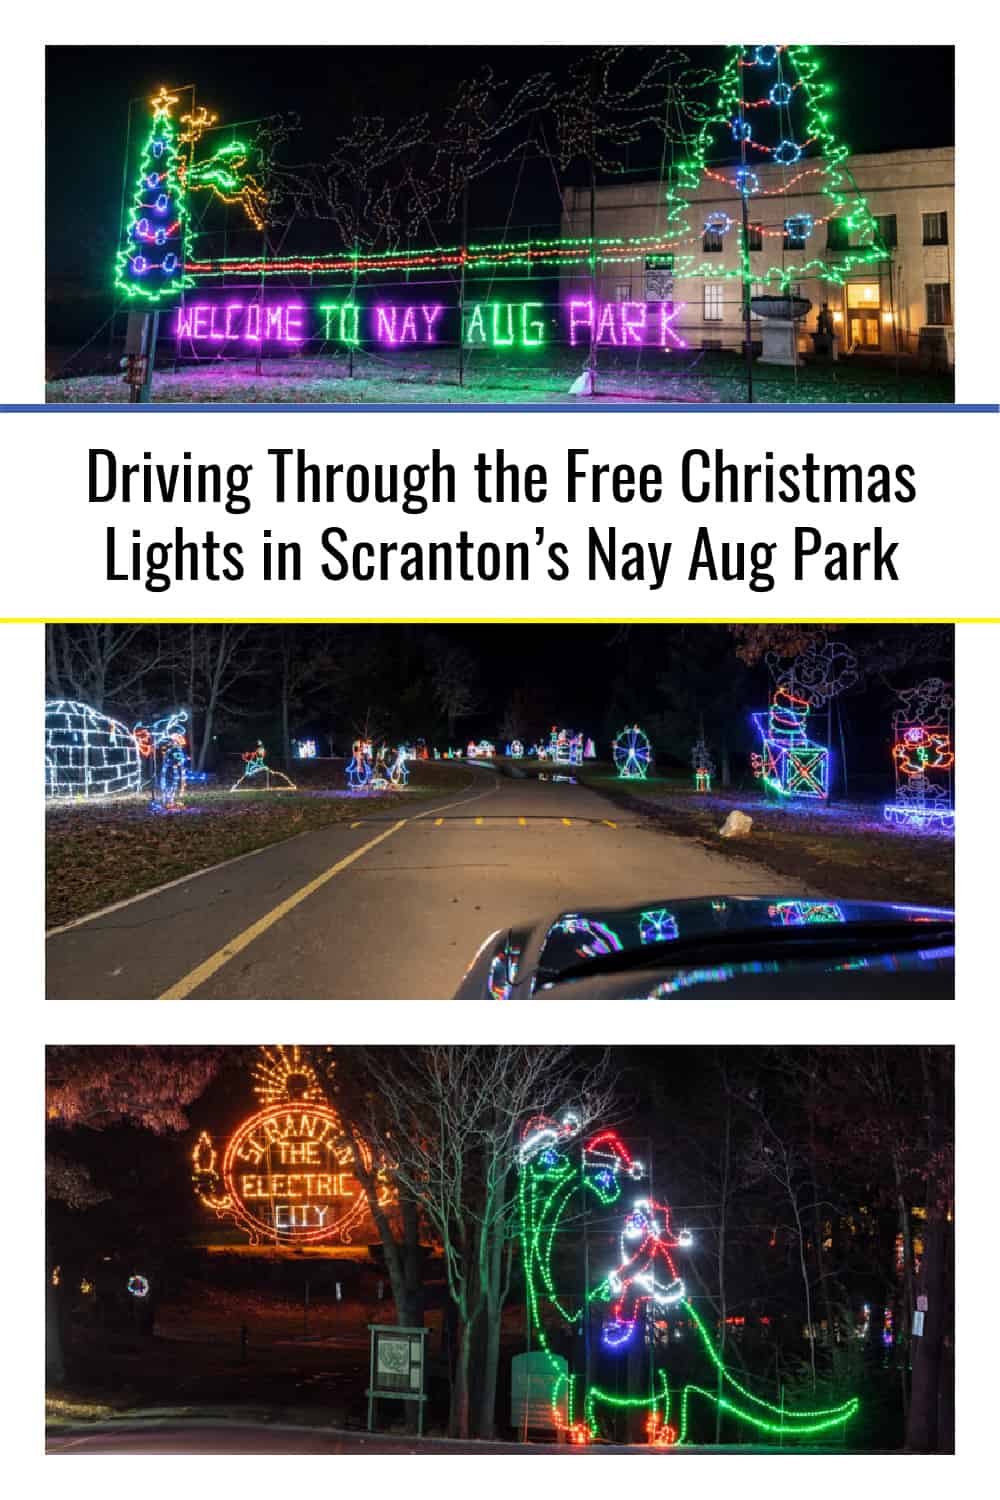 Driving Through the Free and Festive Christmas Lights in Scranton's Nay